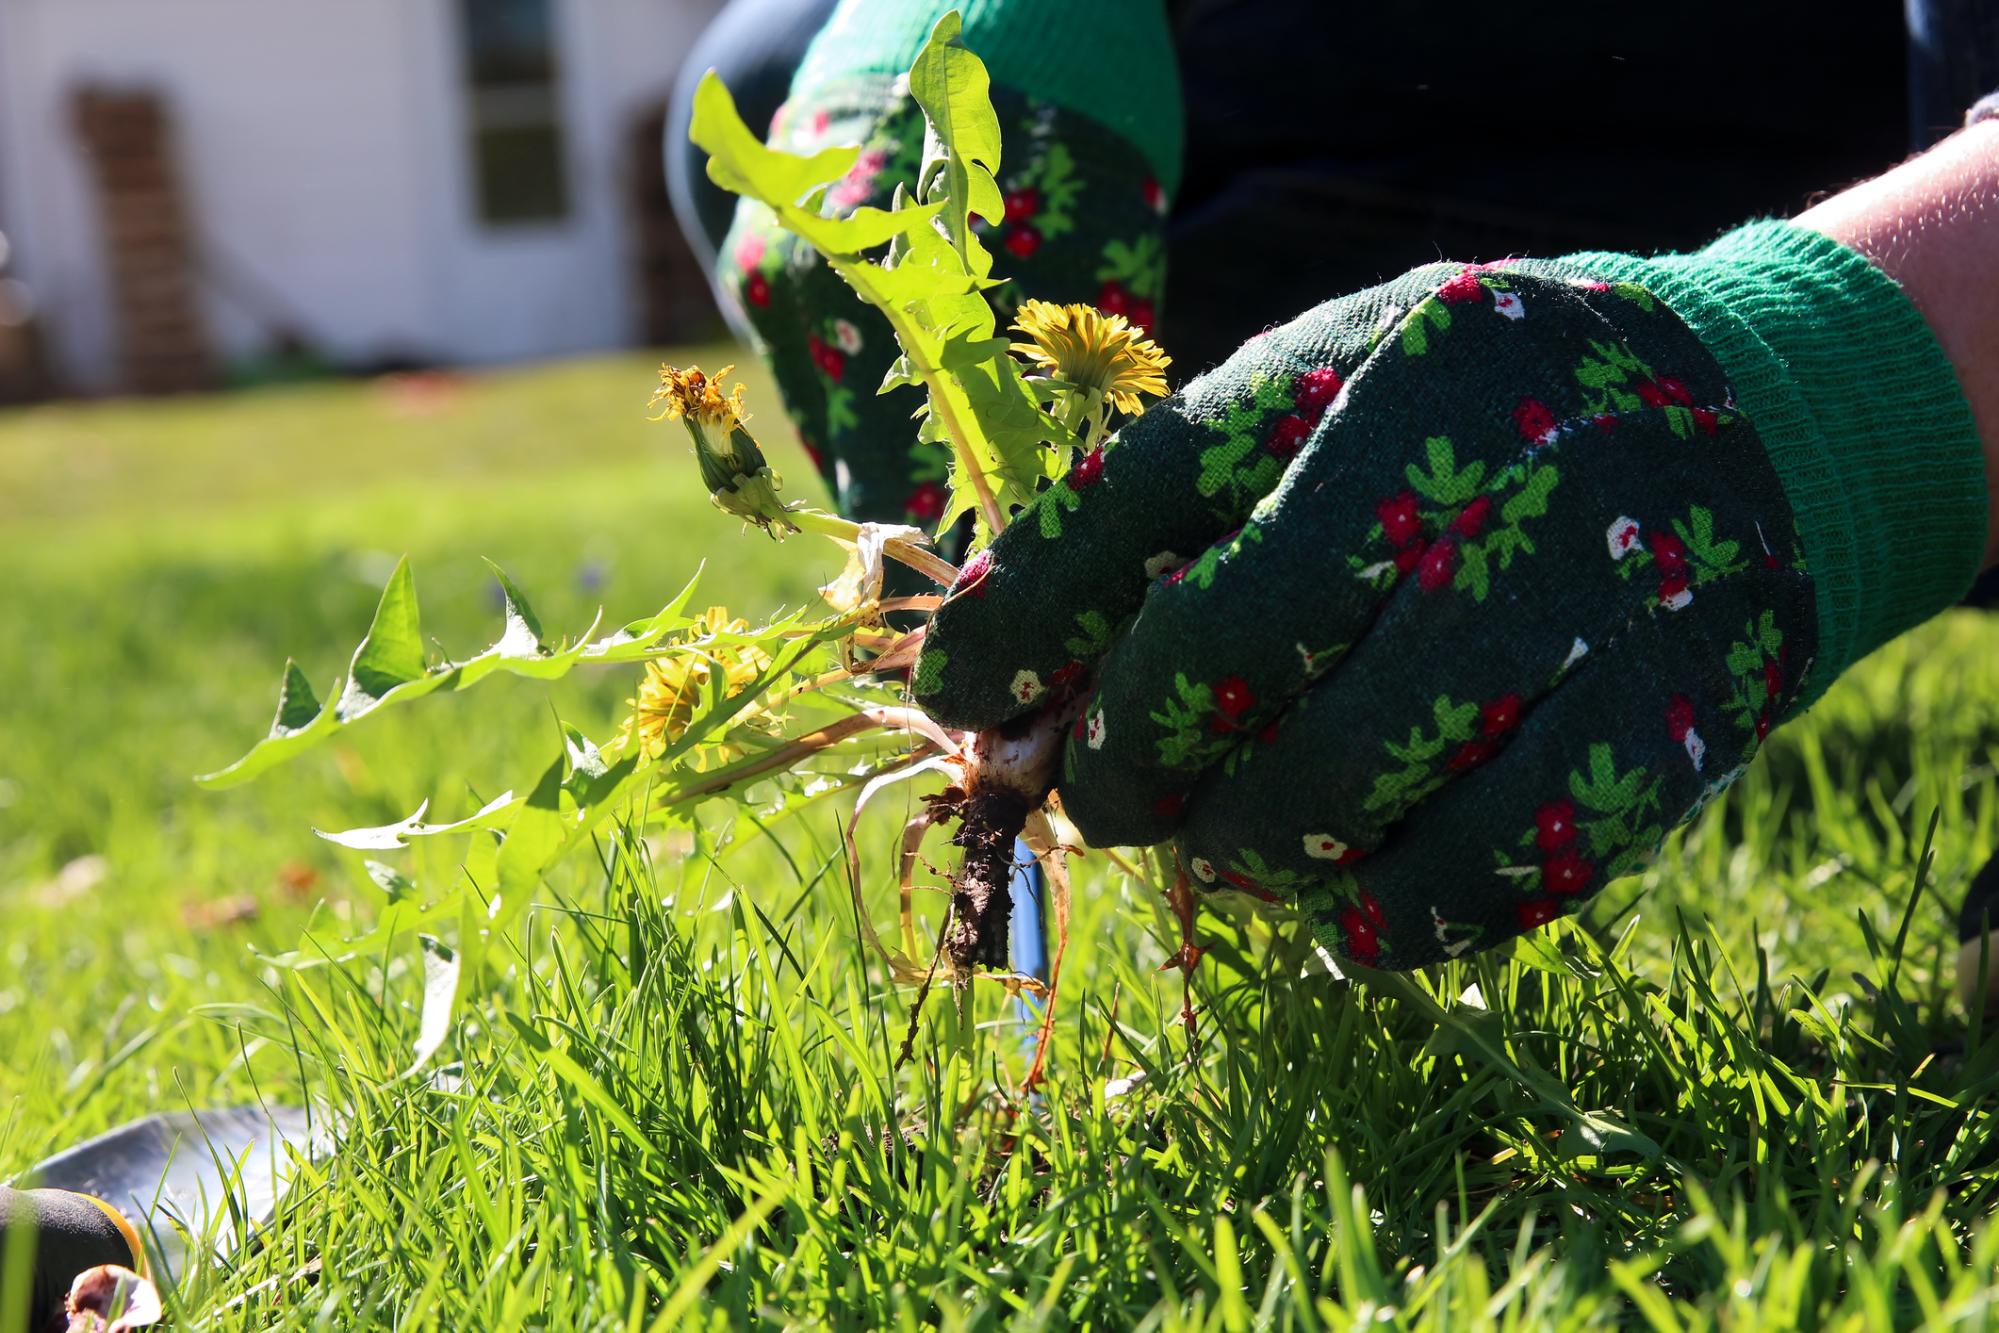 Picking weeds by hand before mowing can help prevent them from spreading.